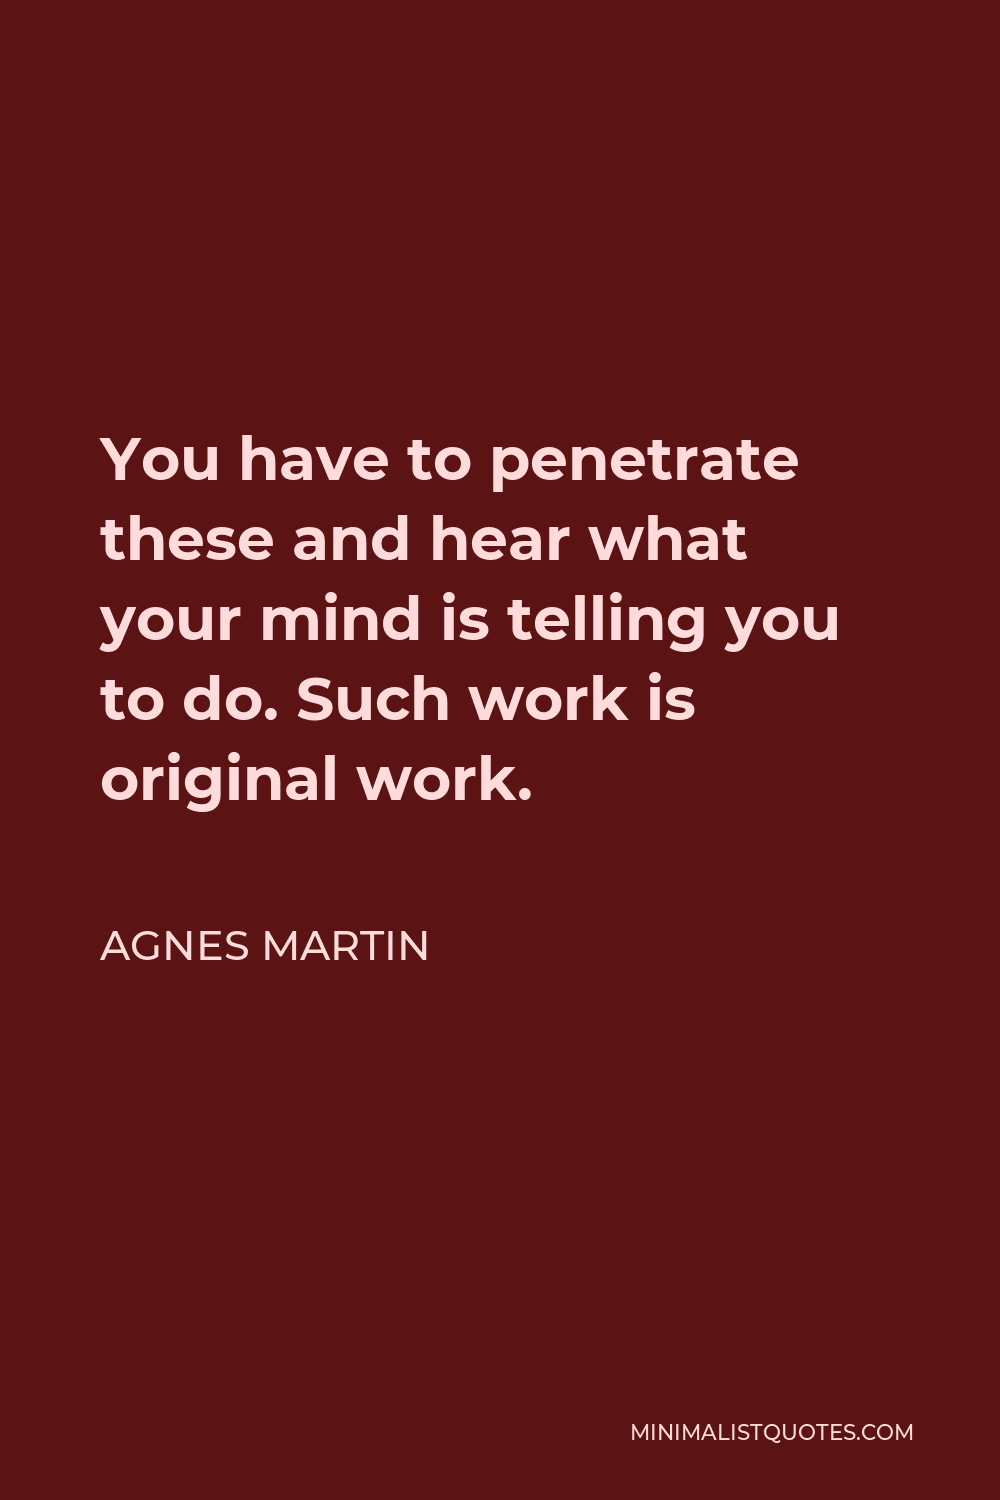 Agnes Martin Quote - You have to penetrate these and hear what your mind is telling you to do. Such work is original work.